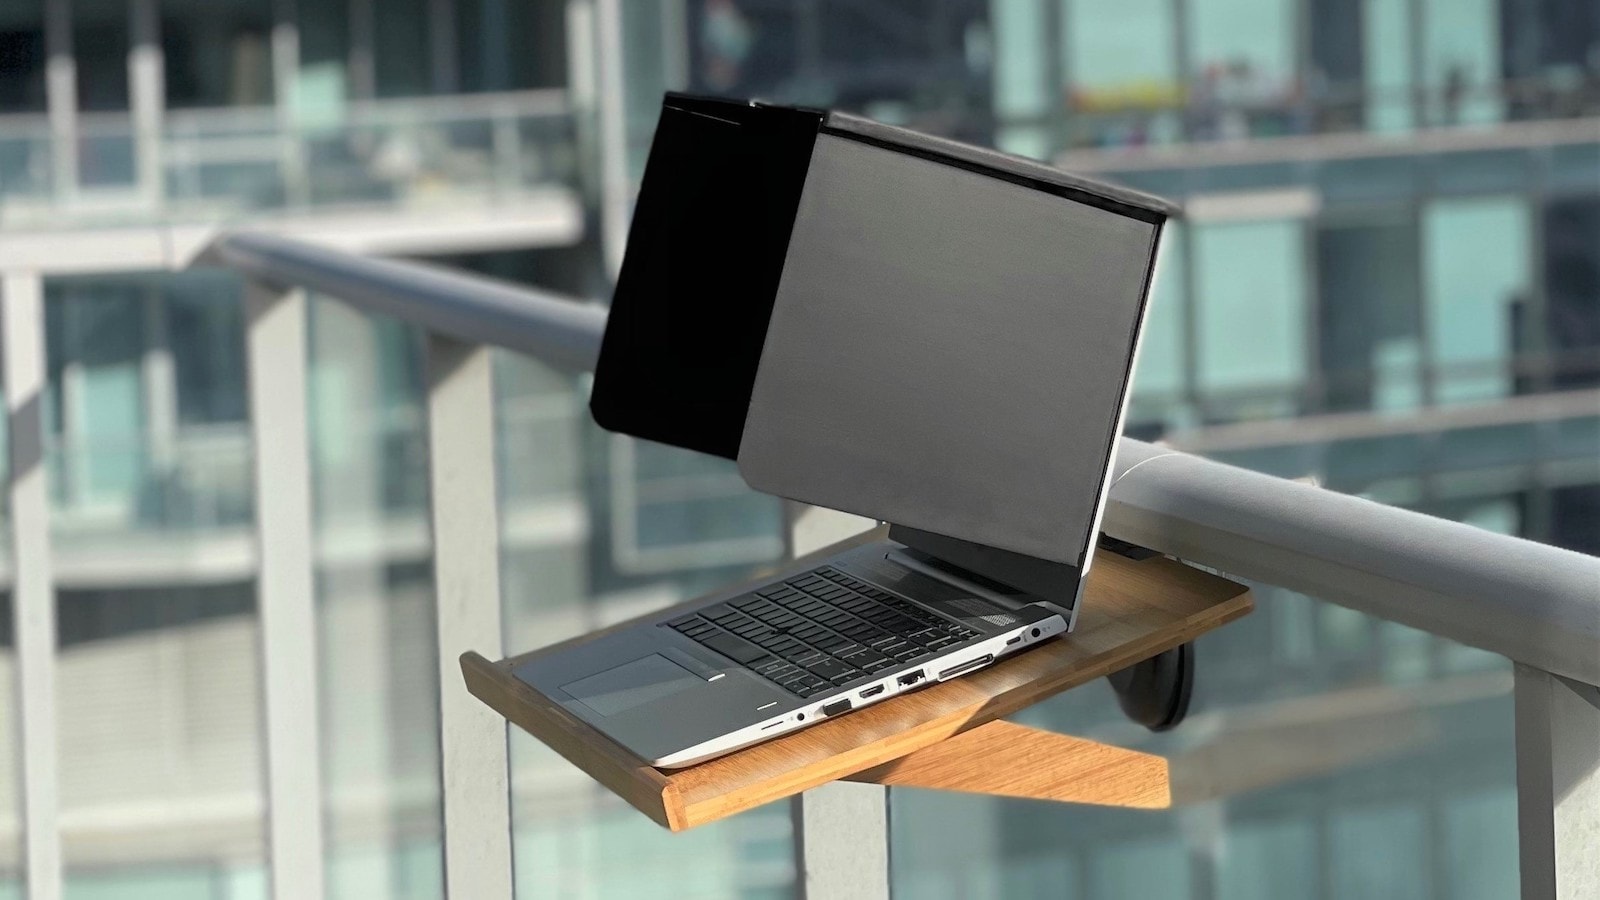 Top 10 Cool Office Gadgets & Accessories to Increase Productivity 